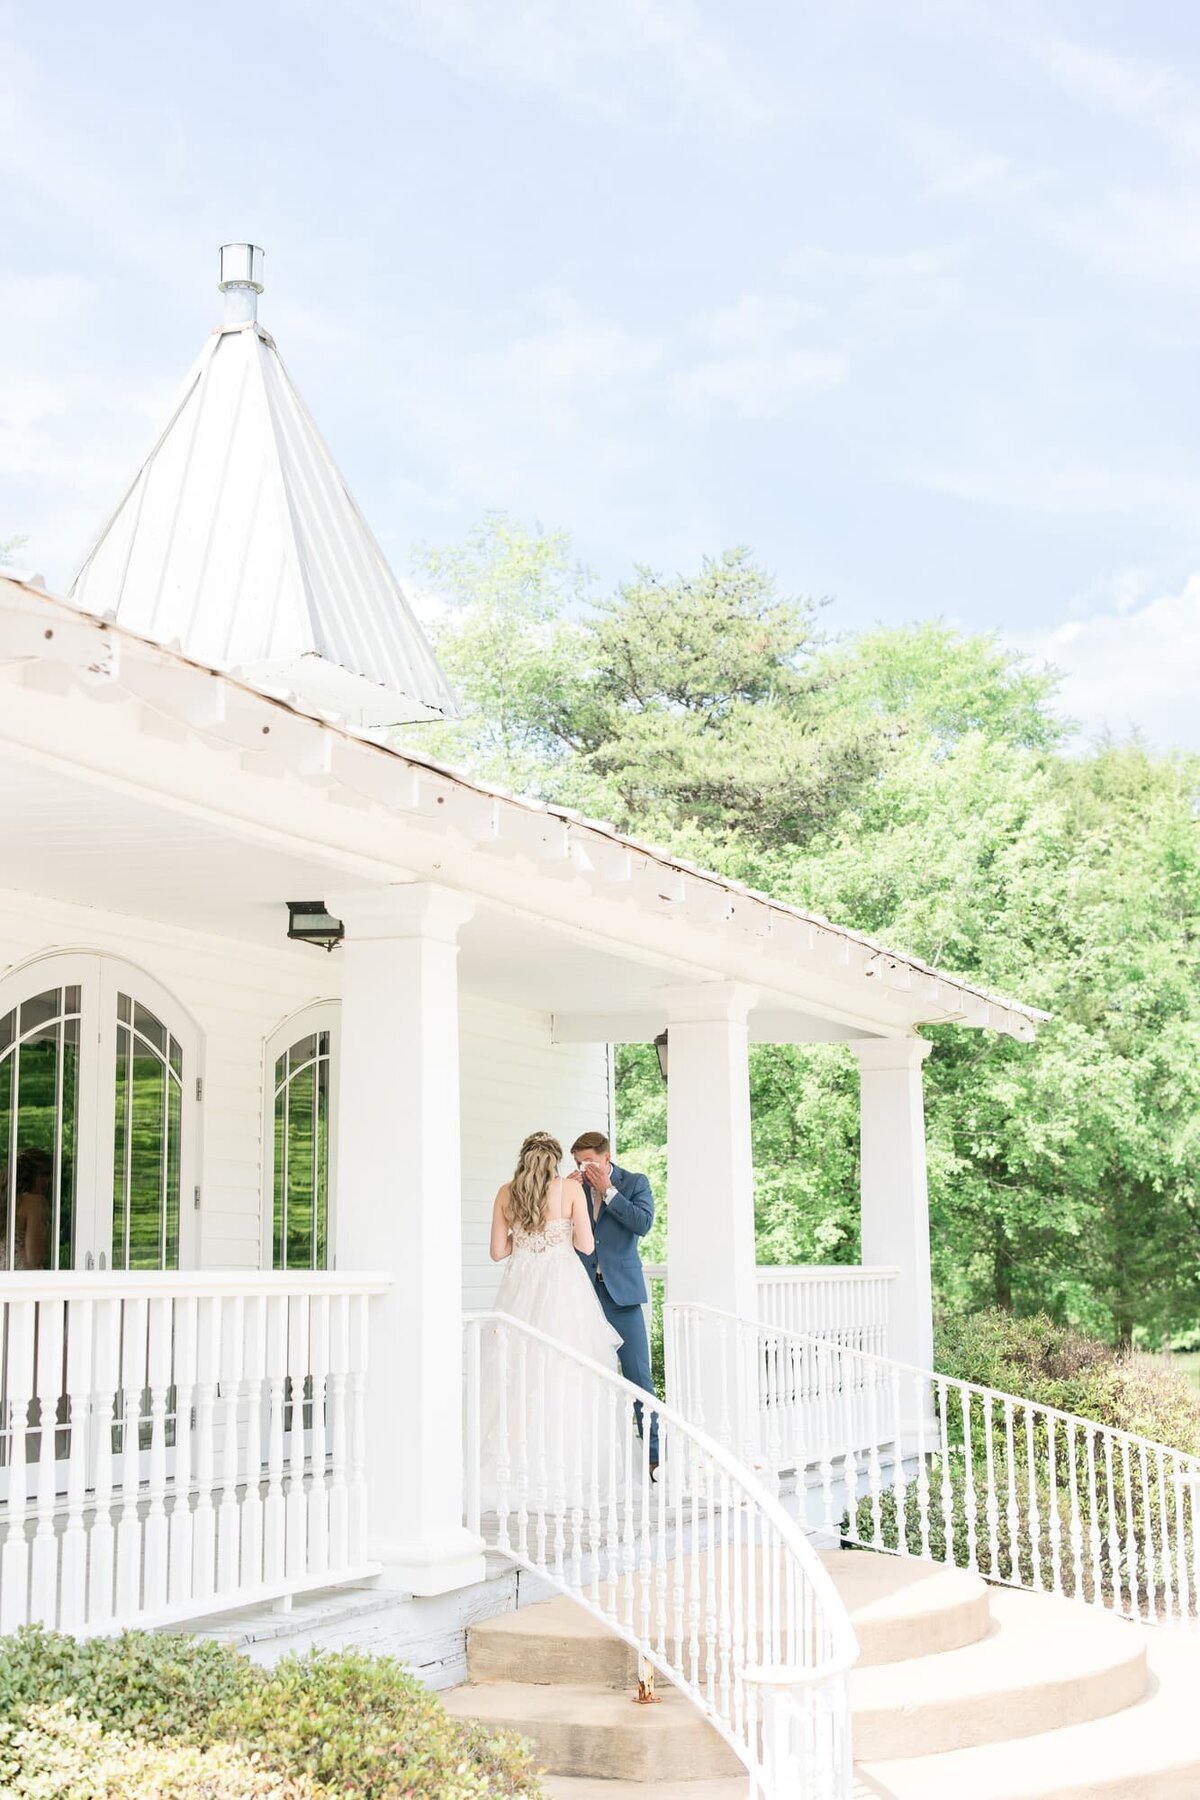 Katie and Alec Wedding Photography Wedding Videography Birmingham, Alabama Husband and Wife Team Photo Video Weddings Engagement Engagements Light Airy Focused on Marriage  Samantha + Connor's Sonne_u90B